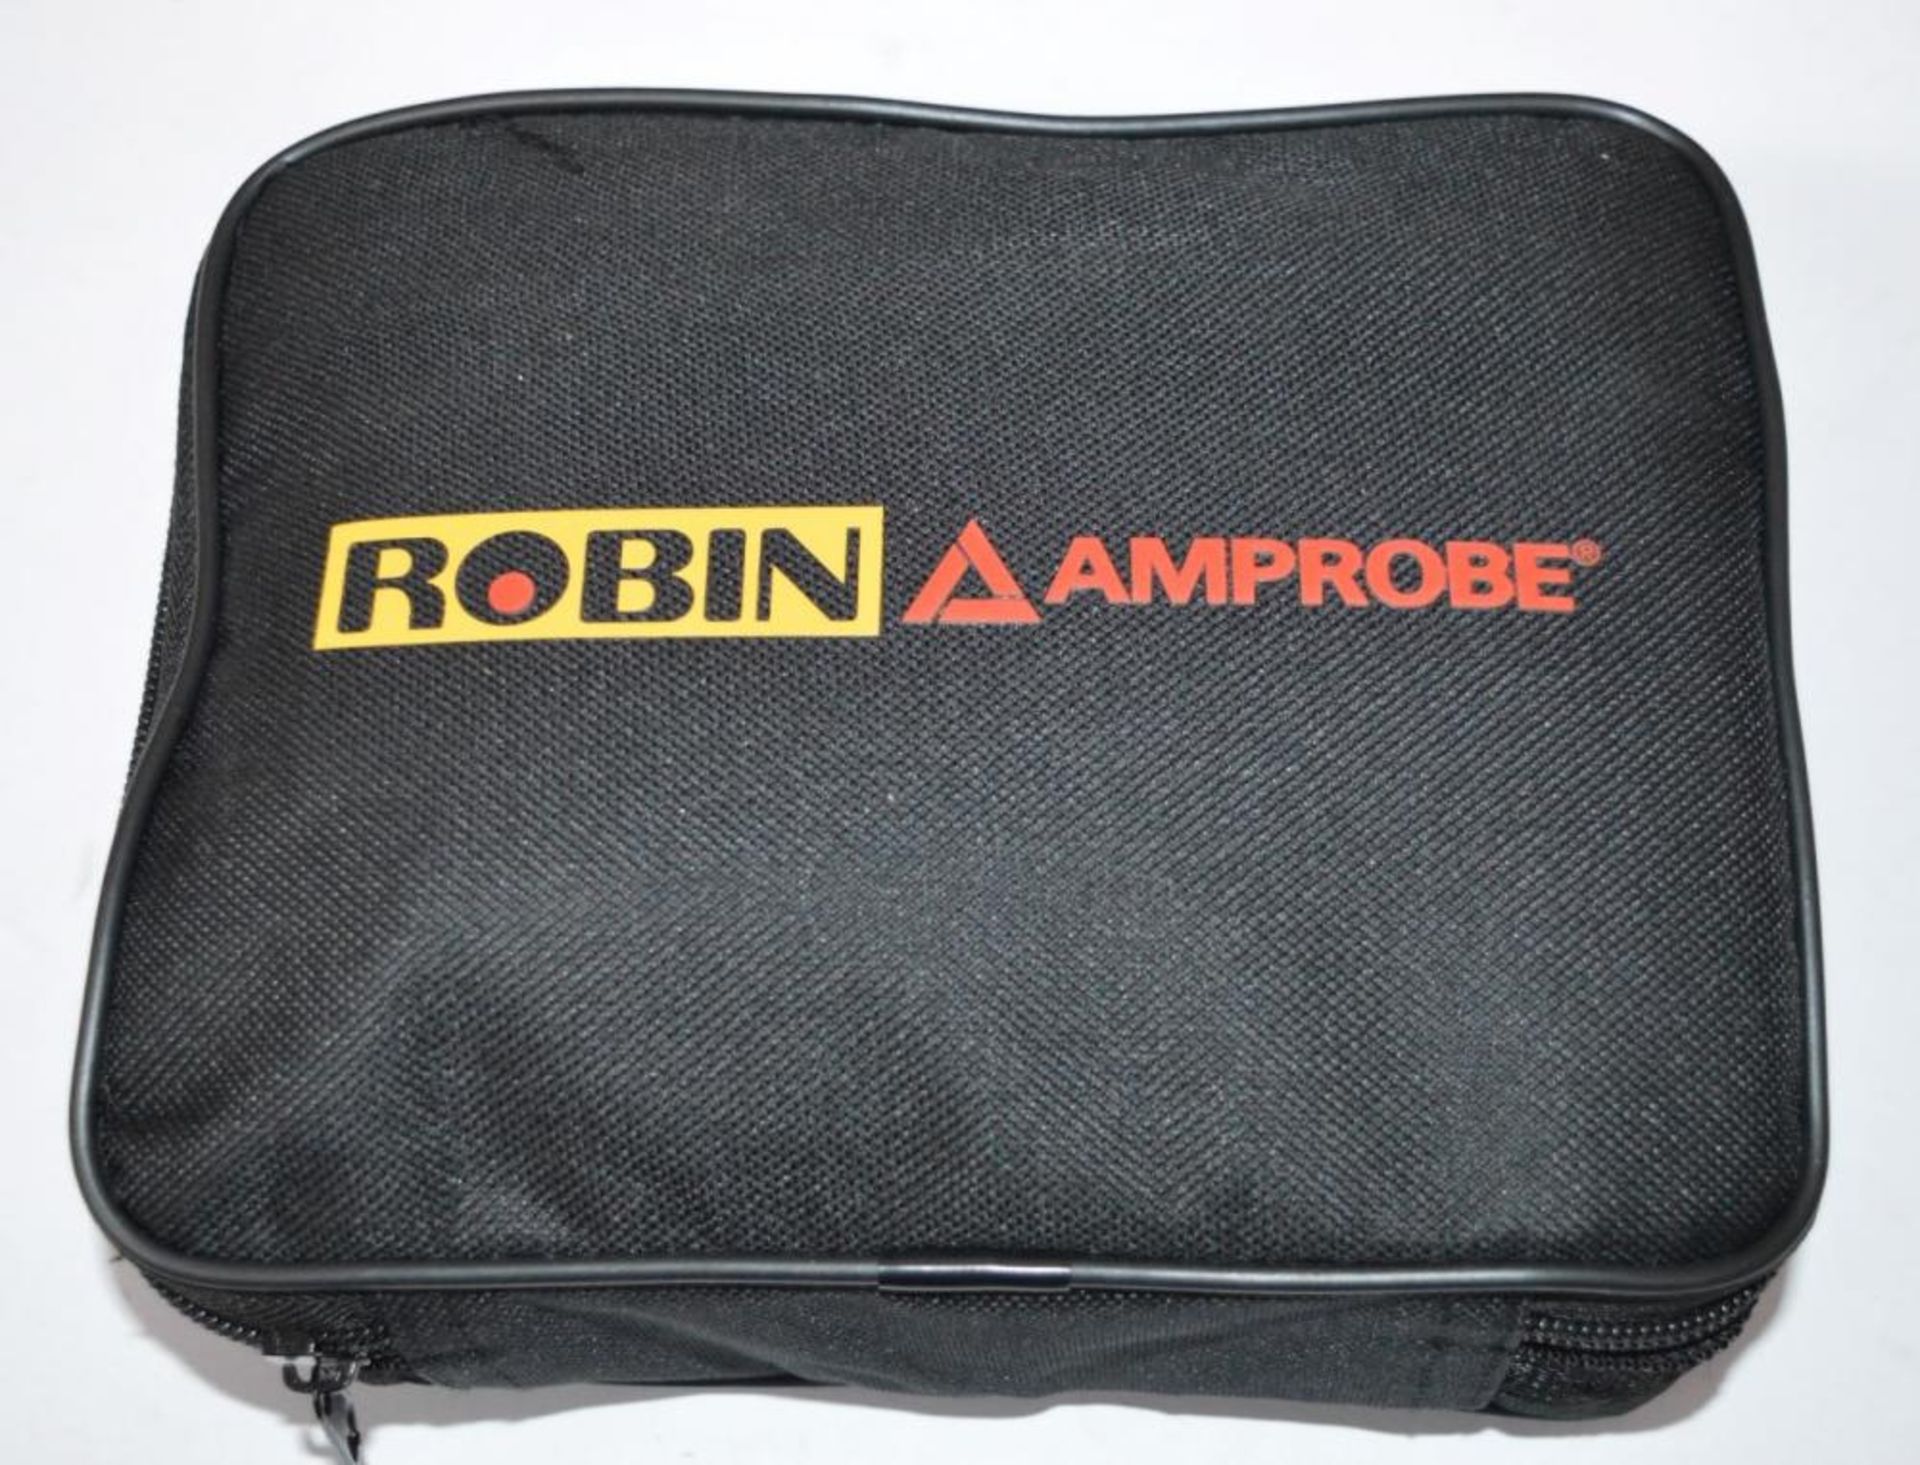 1 x Robin Amprobe Digital RCD Tester With Fast Trip - Model KMP7020 - Boxed With All Accessories - C - Image 11 of 12